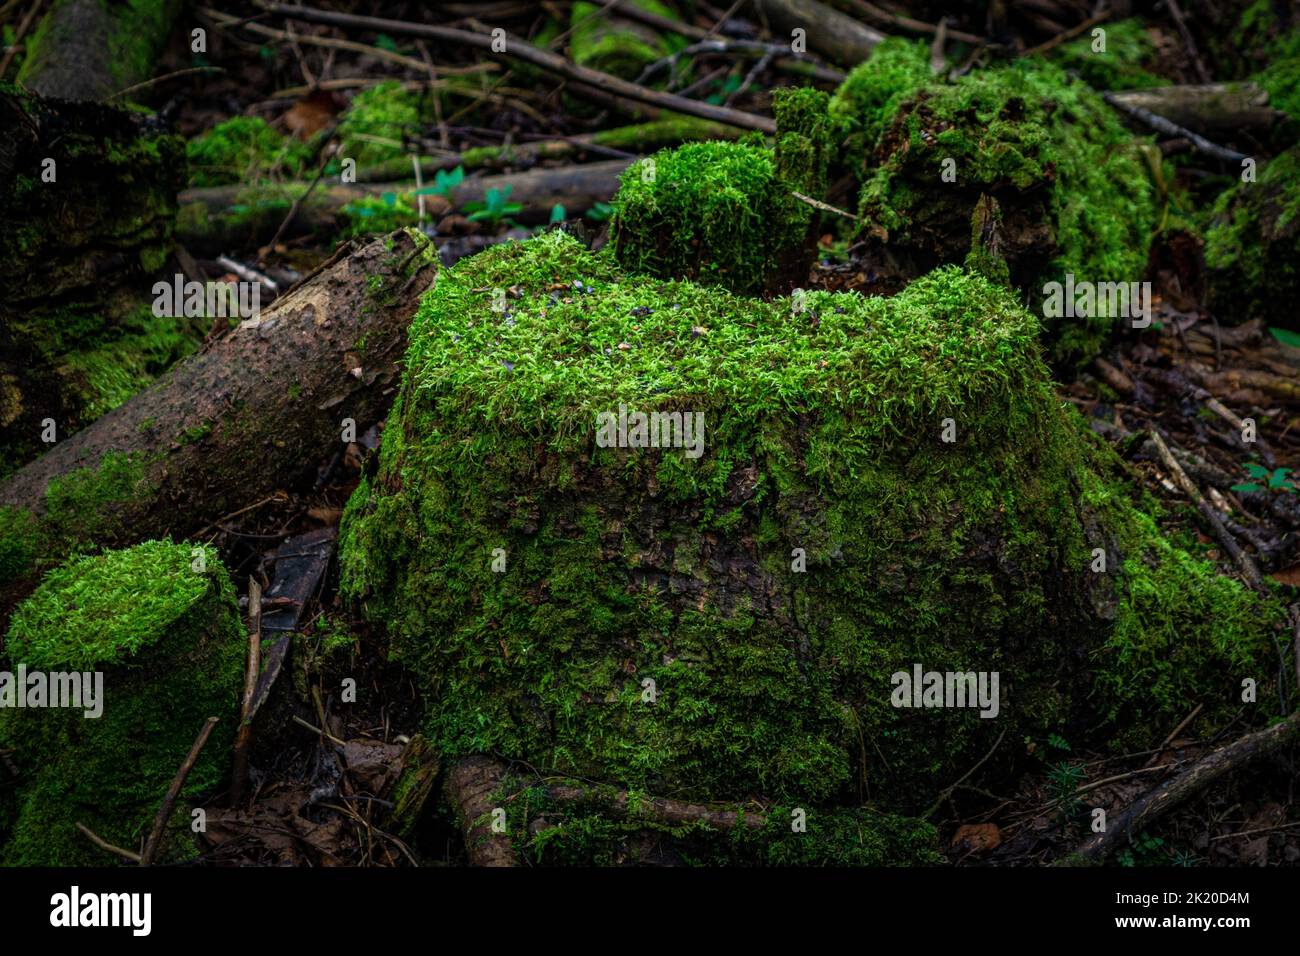 Tree stump overgrown with moss in the woods. Close up view Stock Photo